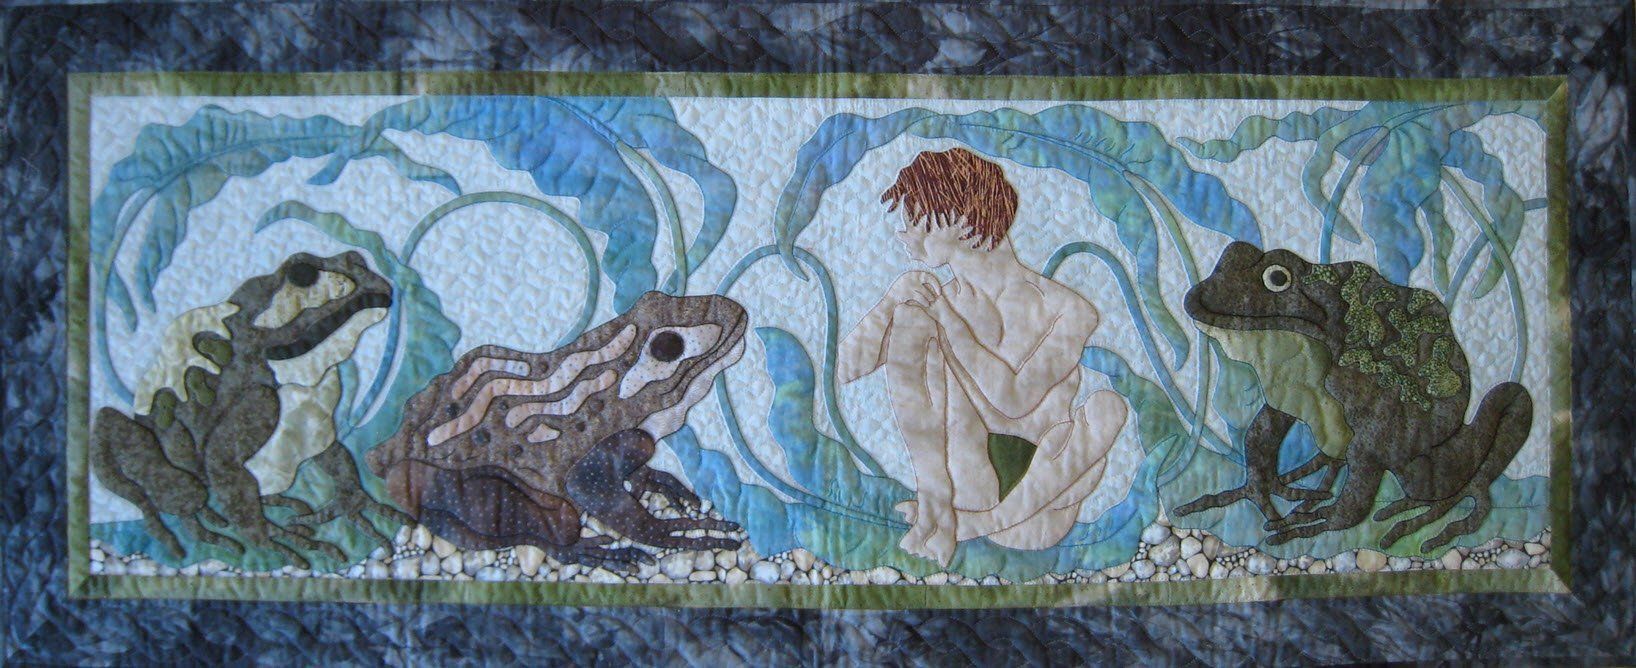 Toad Boy Quilt by Suzanne Marshall, a Quilt Maker